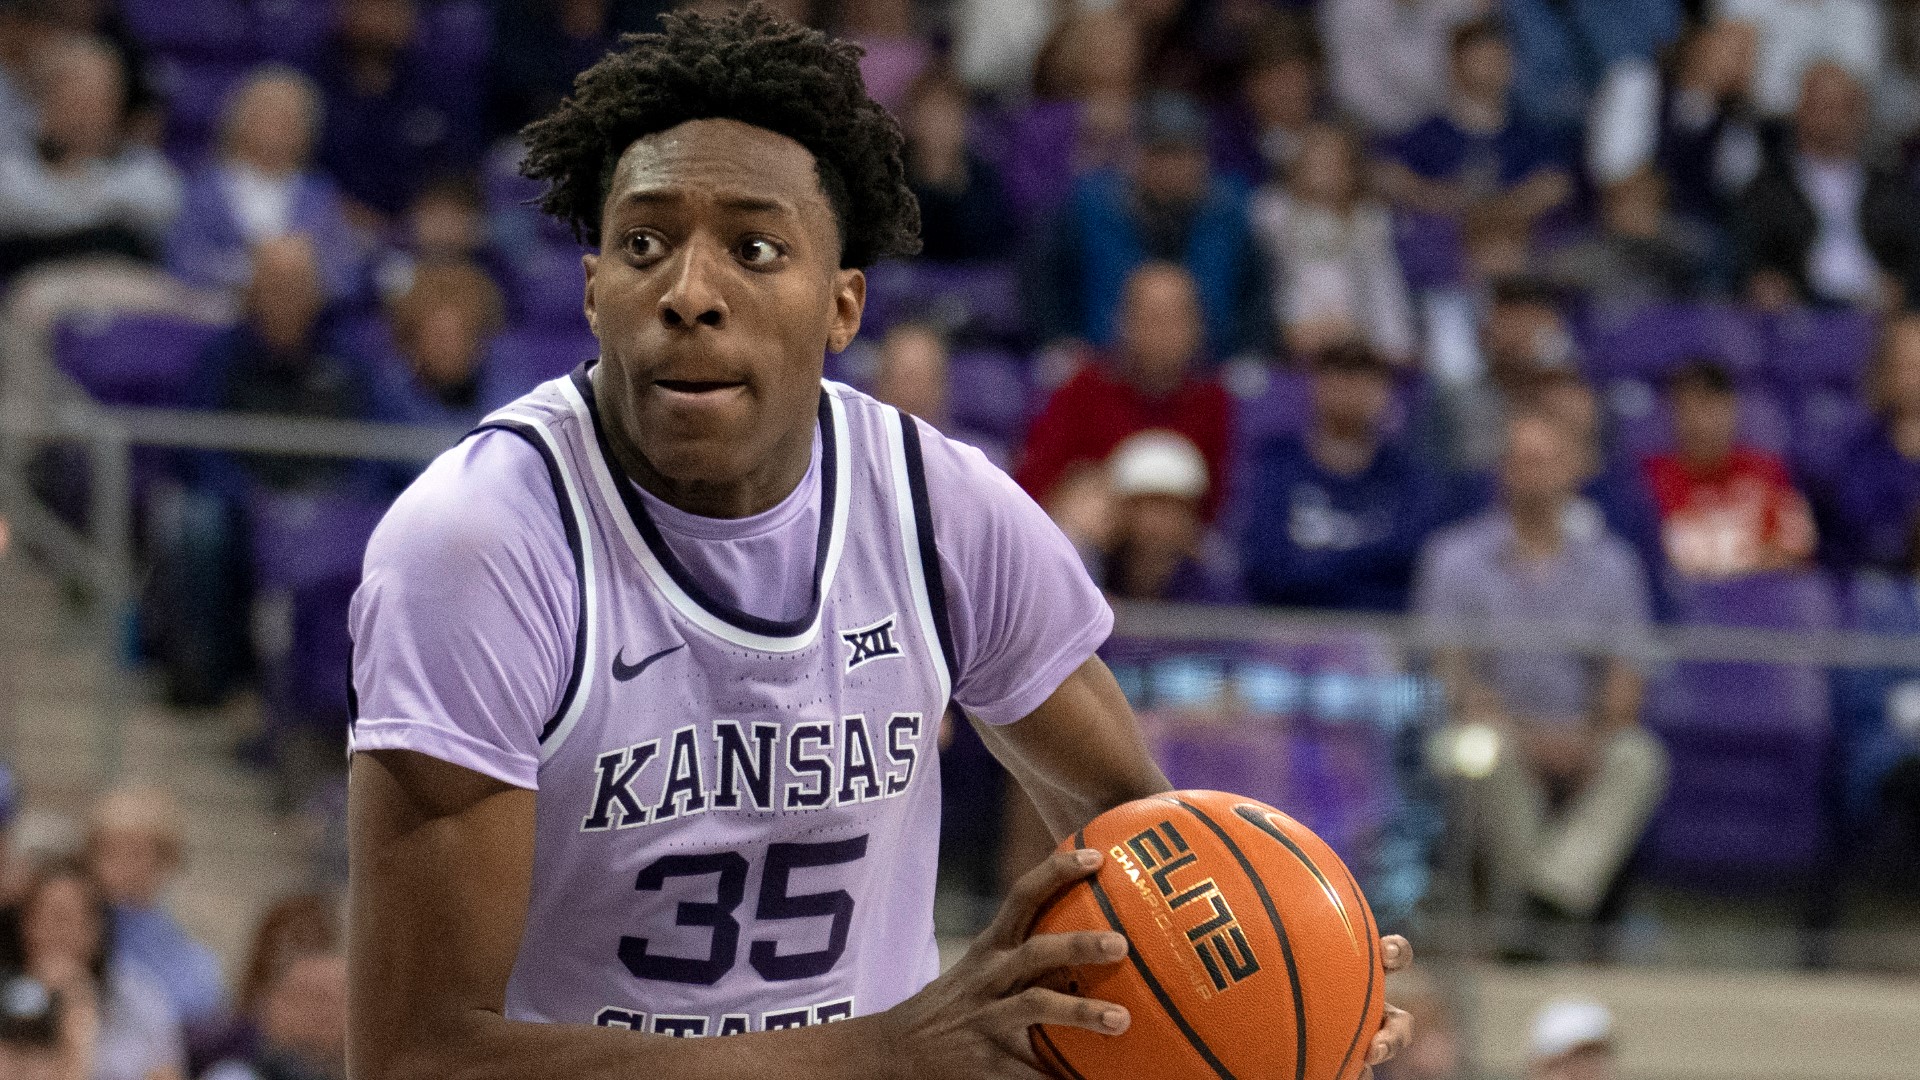 The Memphis Tigers (7-2) basketball team picked up a big midseason acquisition. Kansas State transfer Nae'Qwan Tomlin announced his commitment to the Tigers.